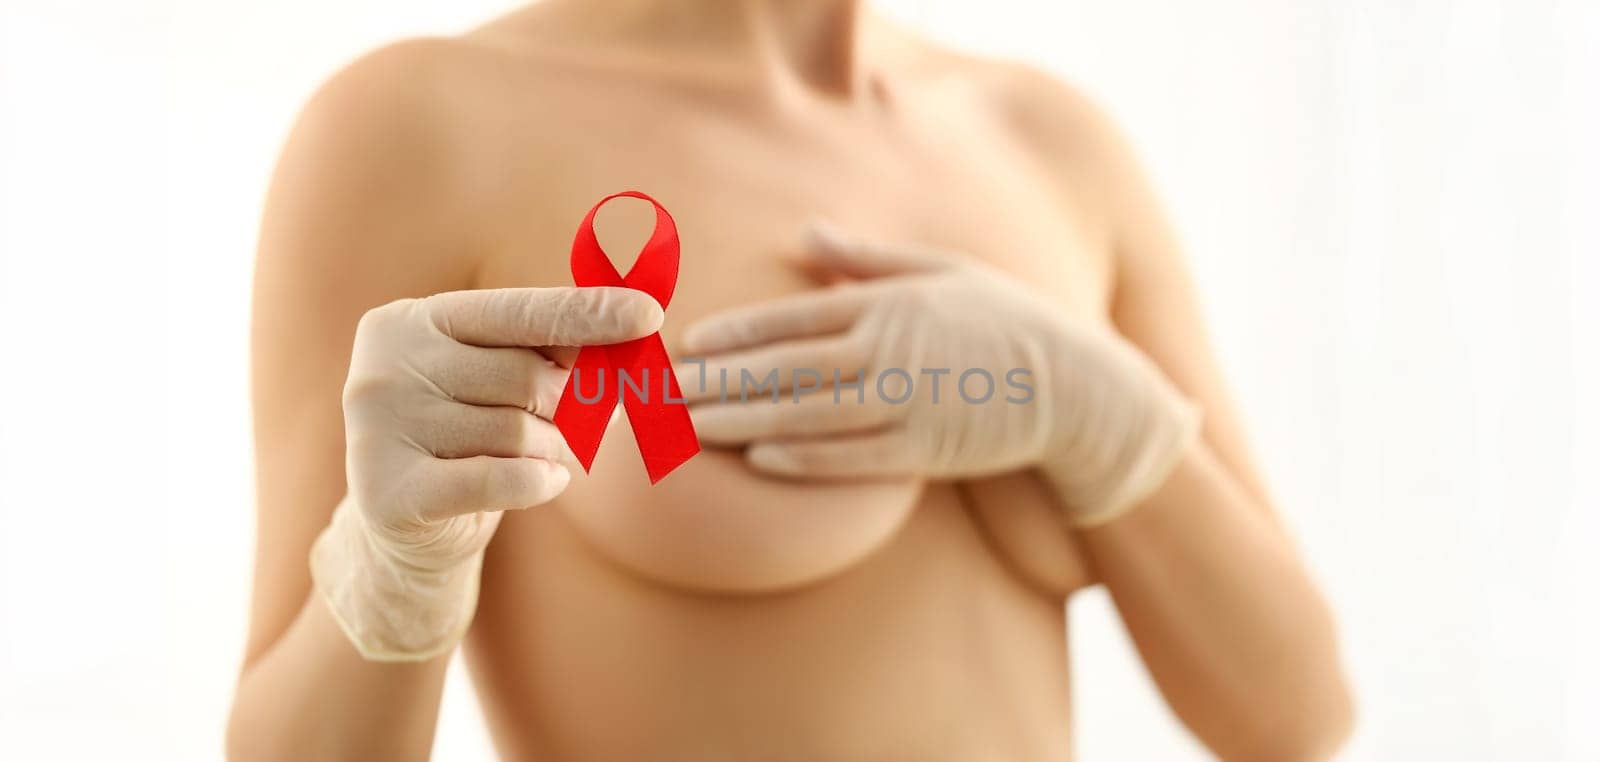 Woman Breasts Anti Cancer Ribbon Campaign Portrait. Preventing Female Breast Oncology Disease. Naked Bust on White Background. Fight Feminine Illness. Beautiful Girl Body Partial View Shot